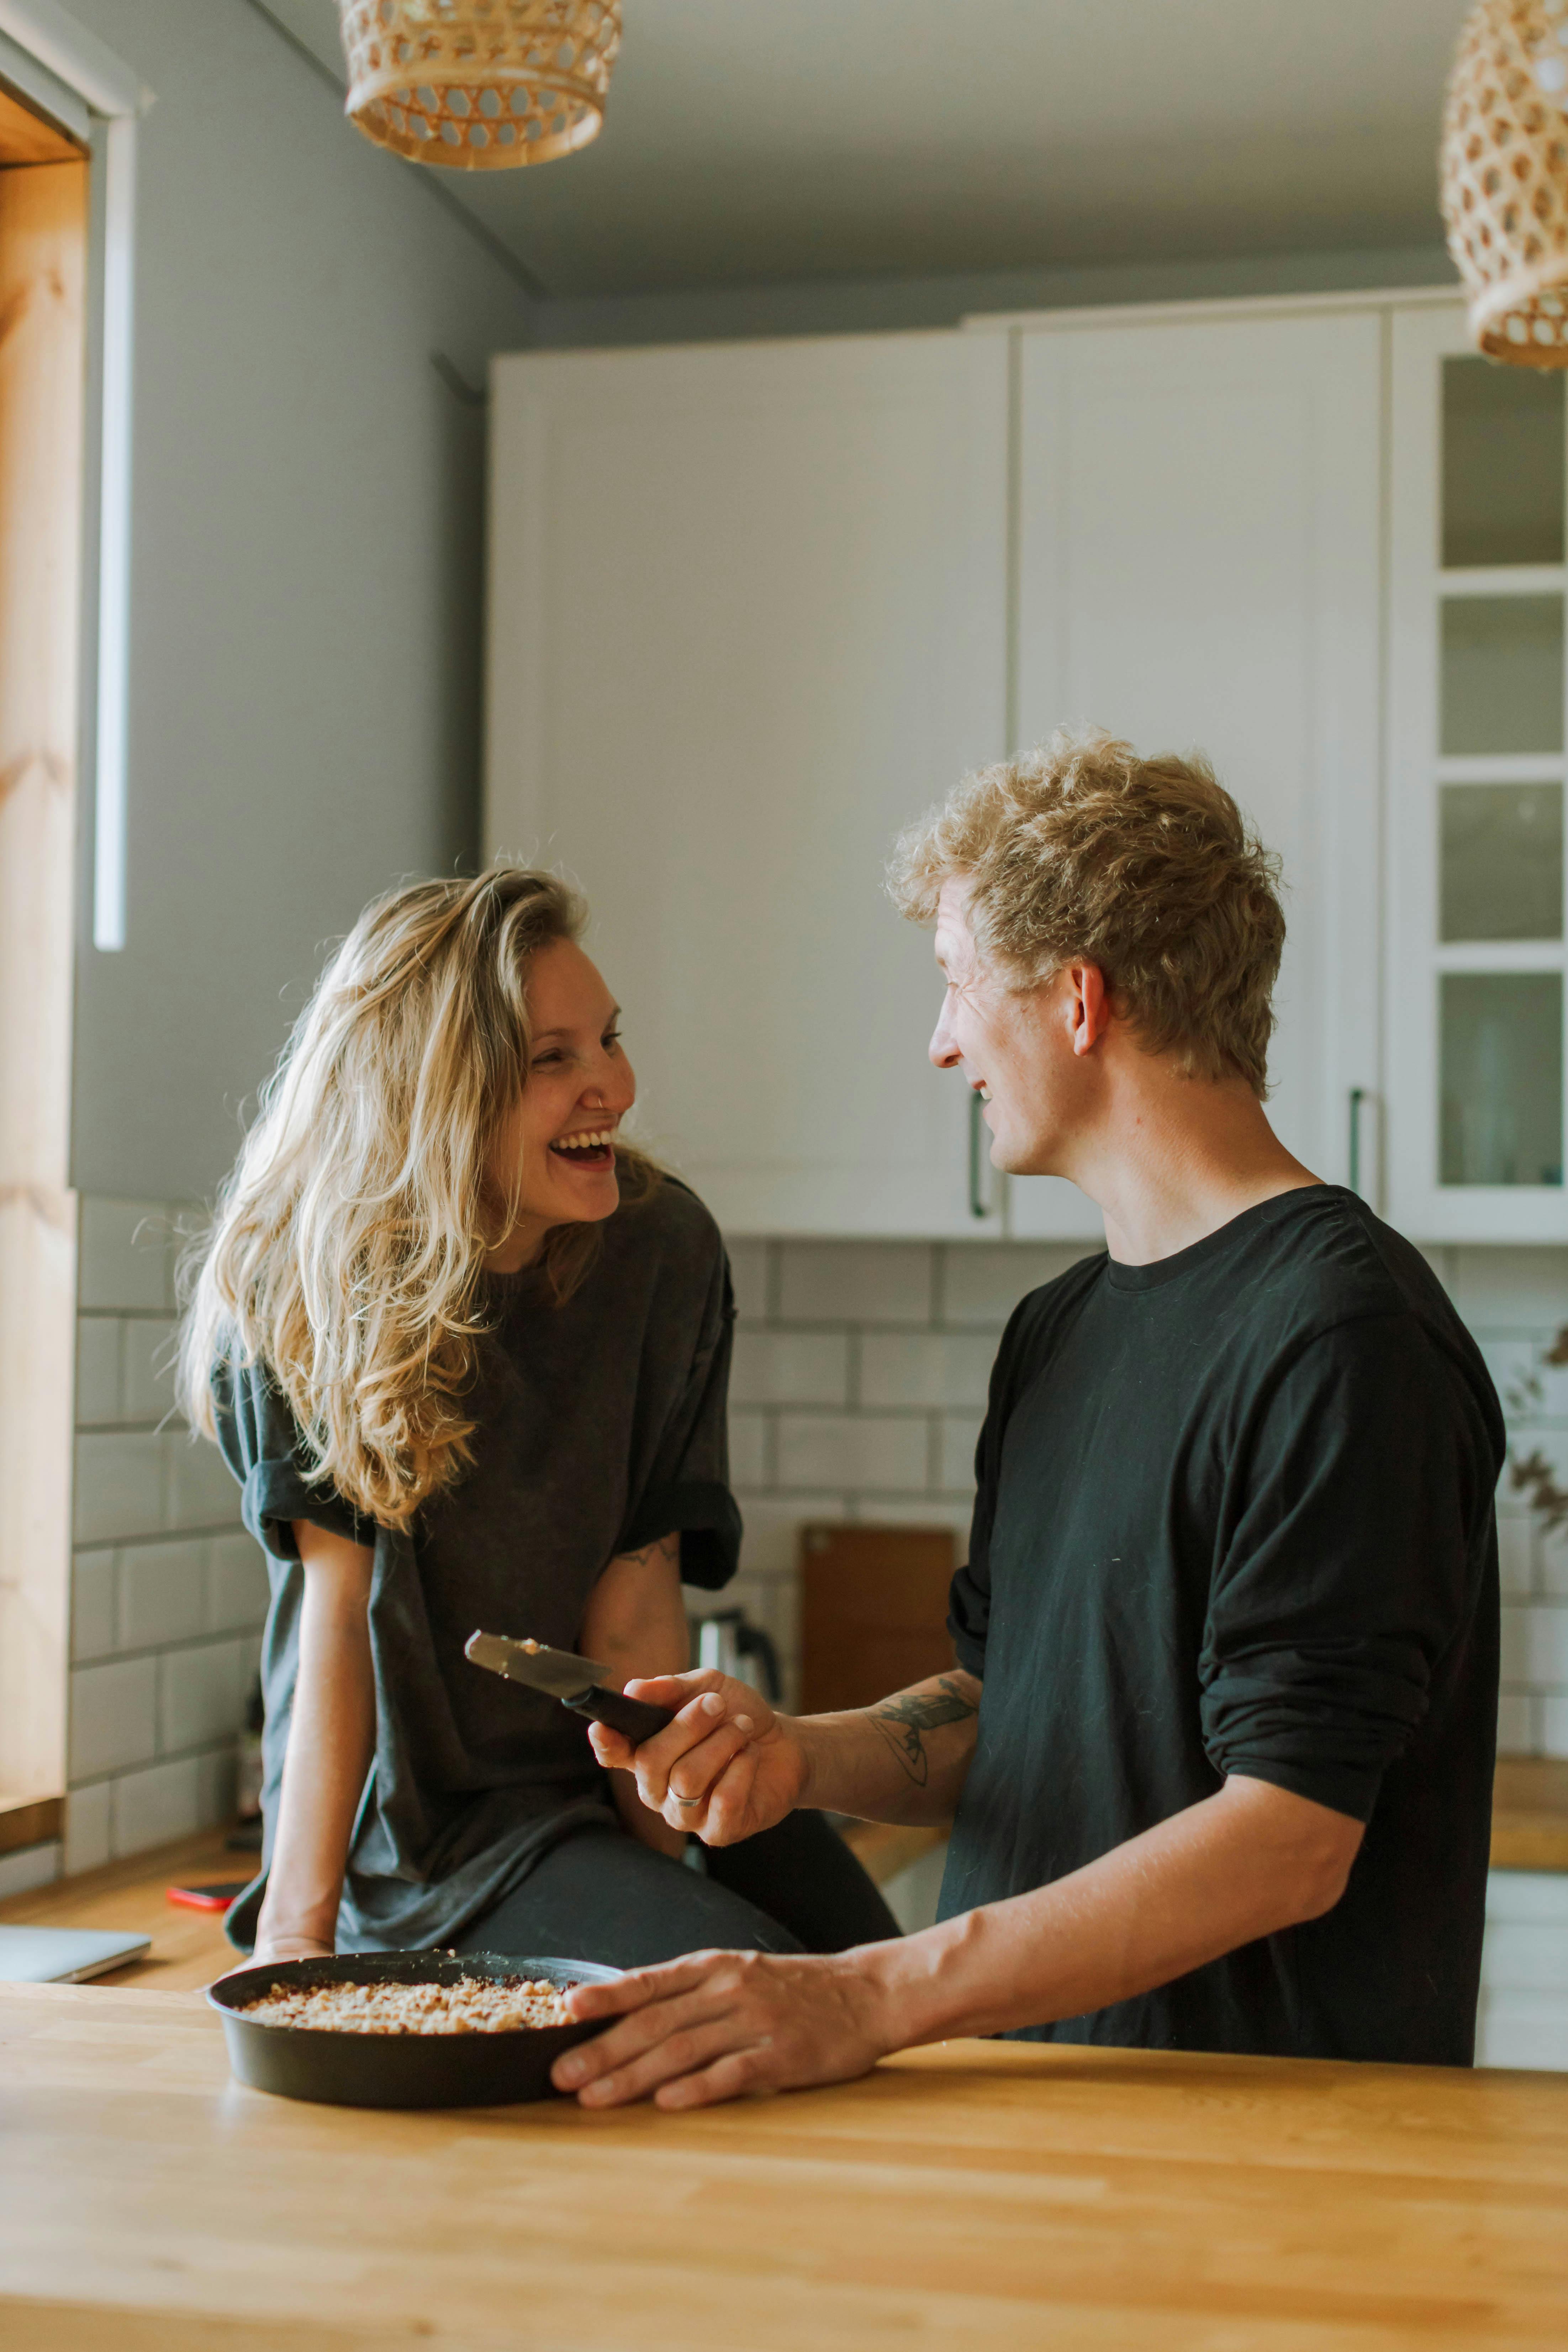 Man and woman laughing while preparing a meal in the kitchen | Source: Pexels